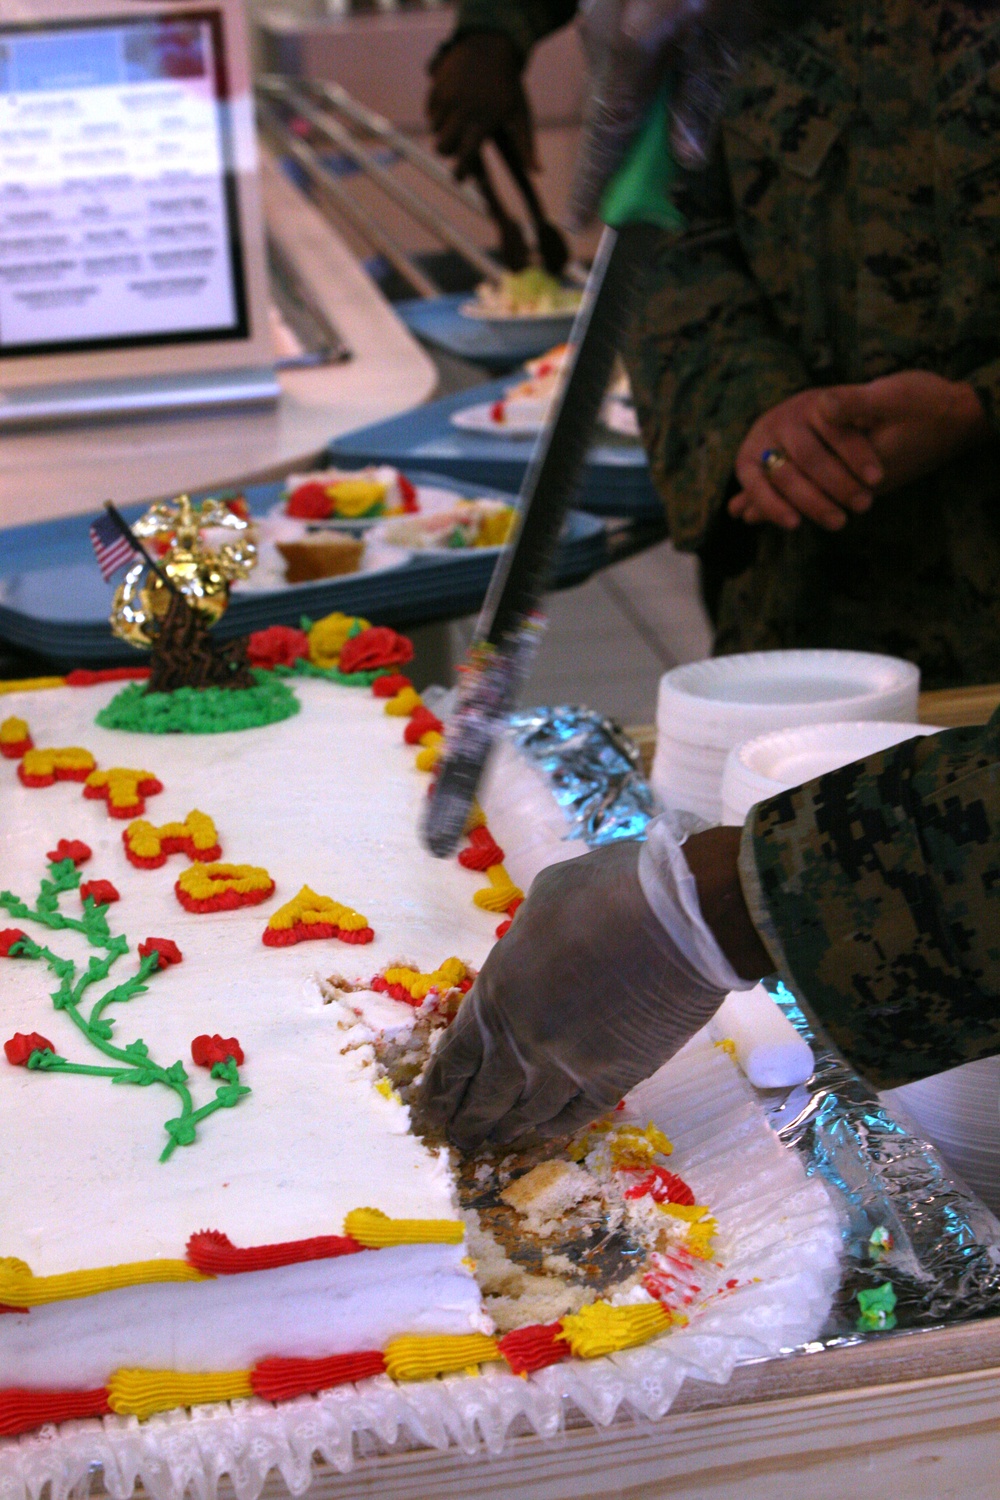 Sweet traditions: Cherry Point Marines come together to make birthday cake